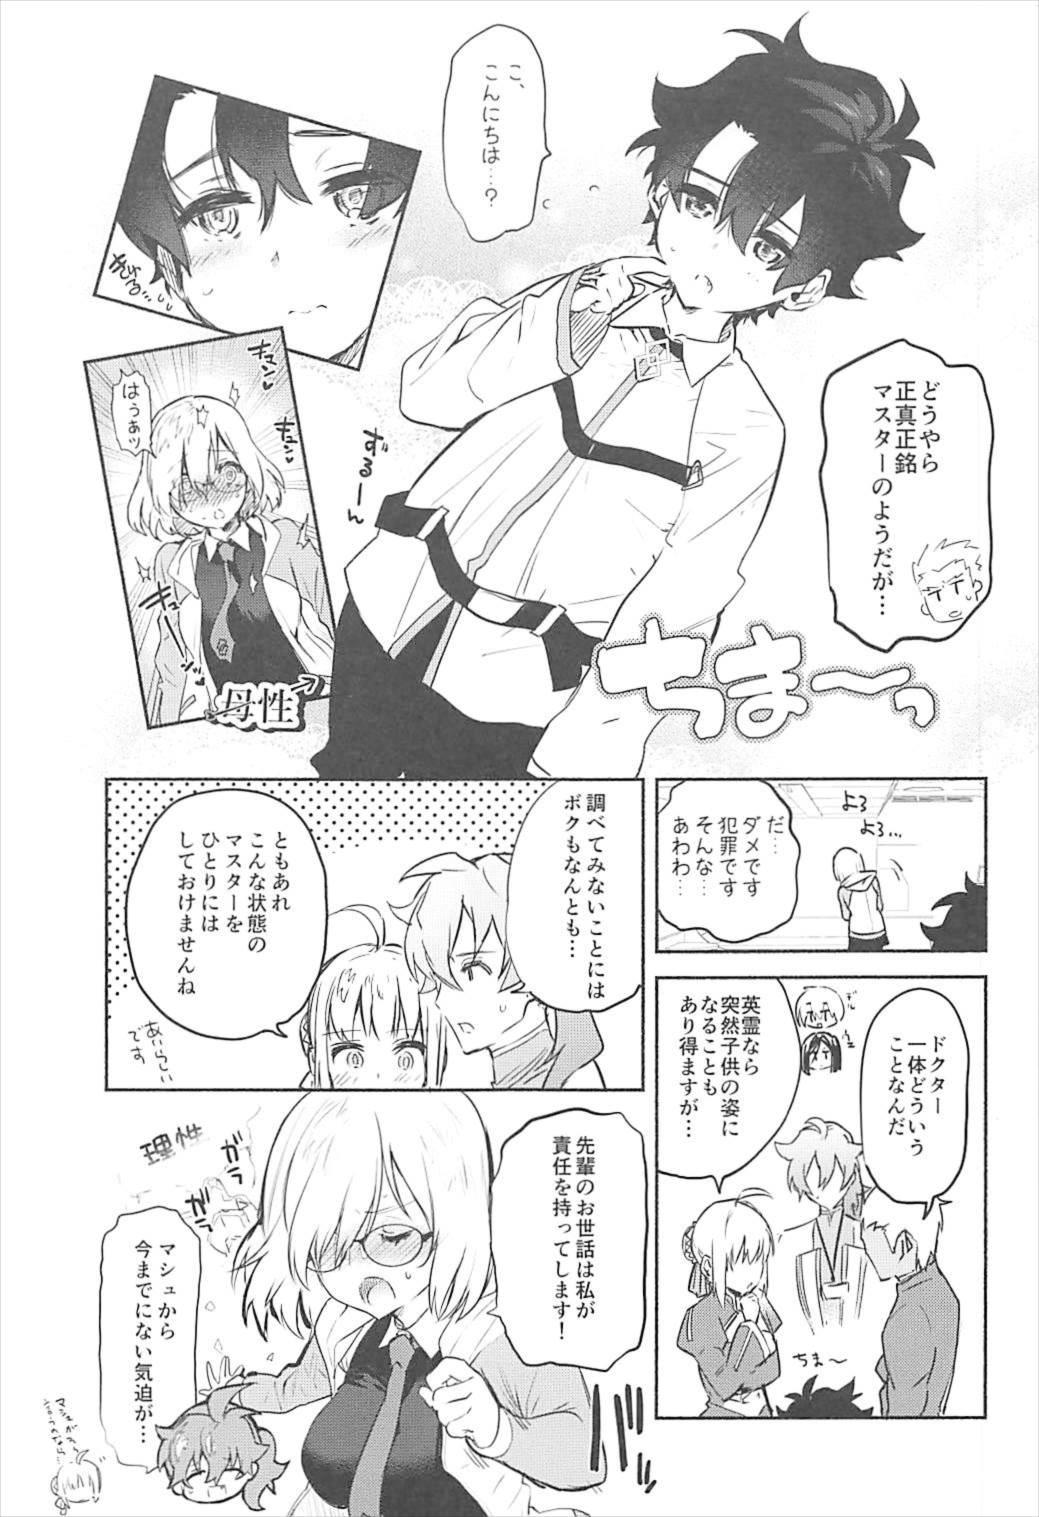 Doll Mash to Issho - Fate grand order Alternative - Page 4